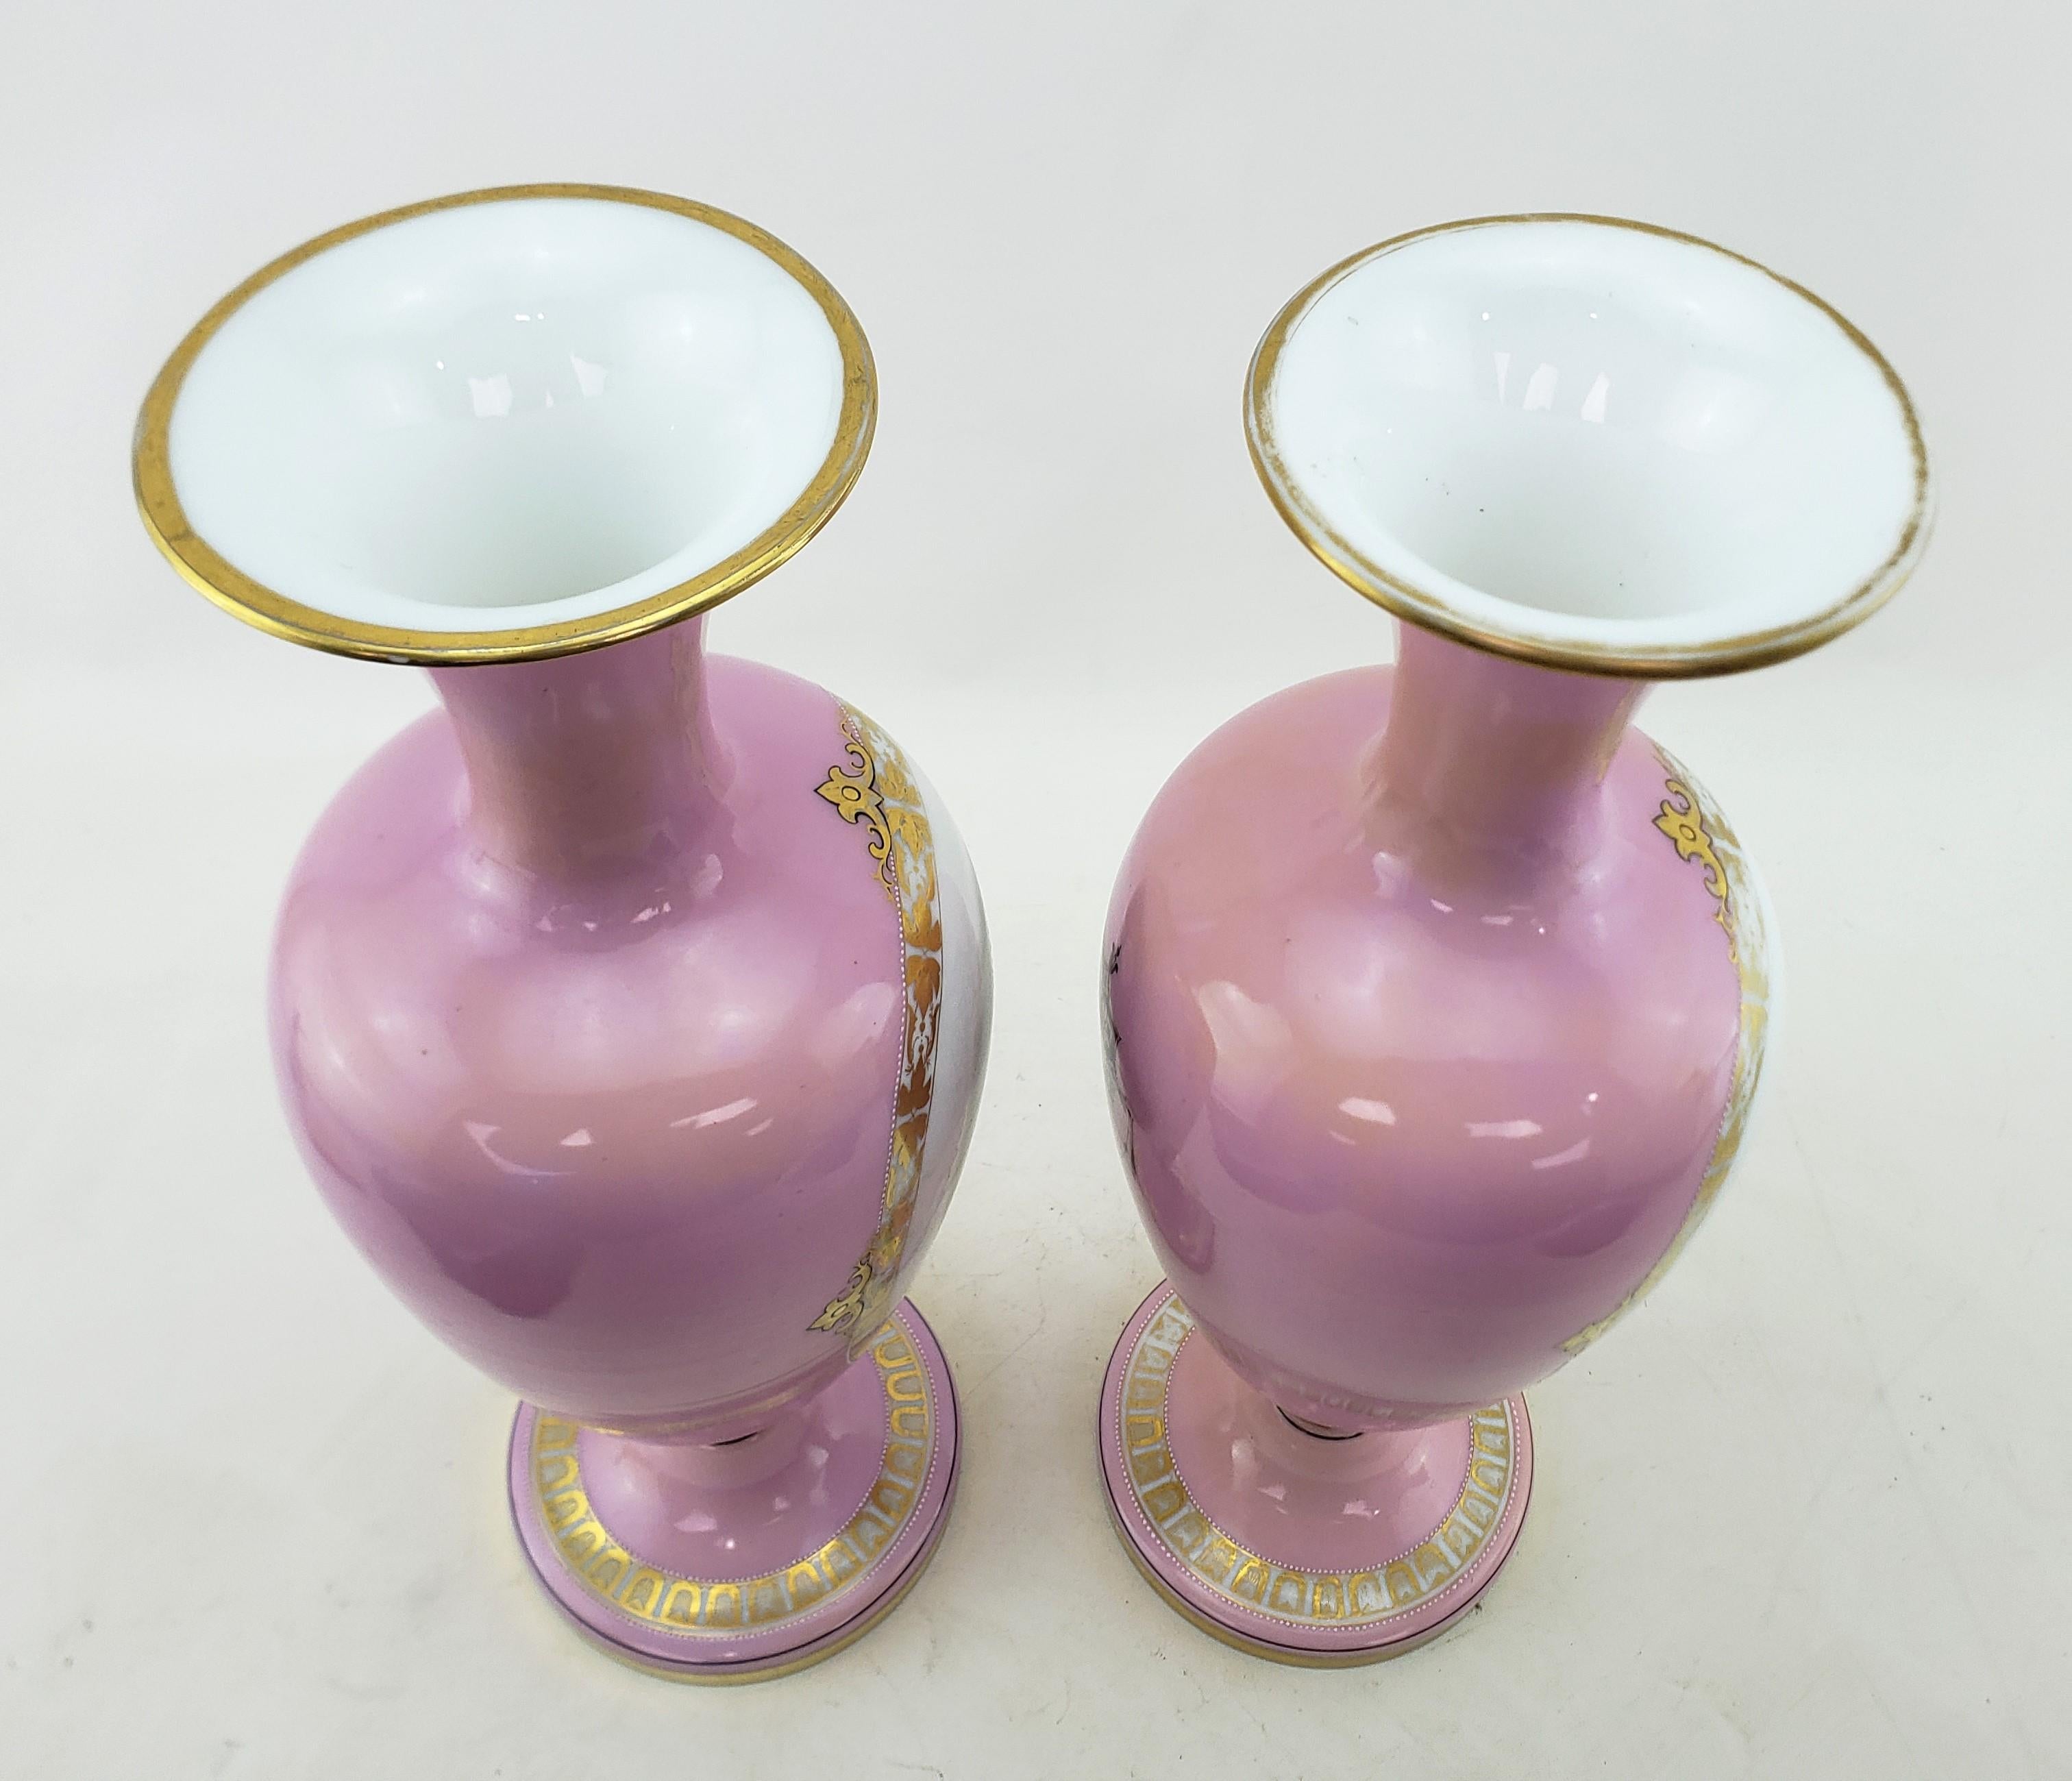 Pair of Large Antique Pink Enameled Glass Portrait Vases with Gilt Accents For Sale 4